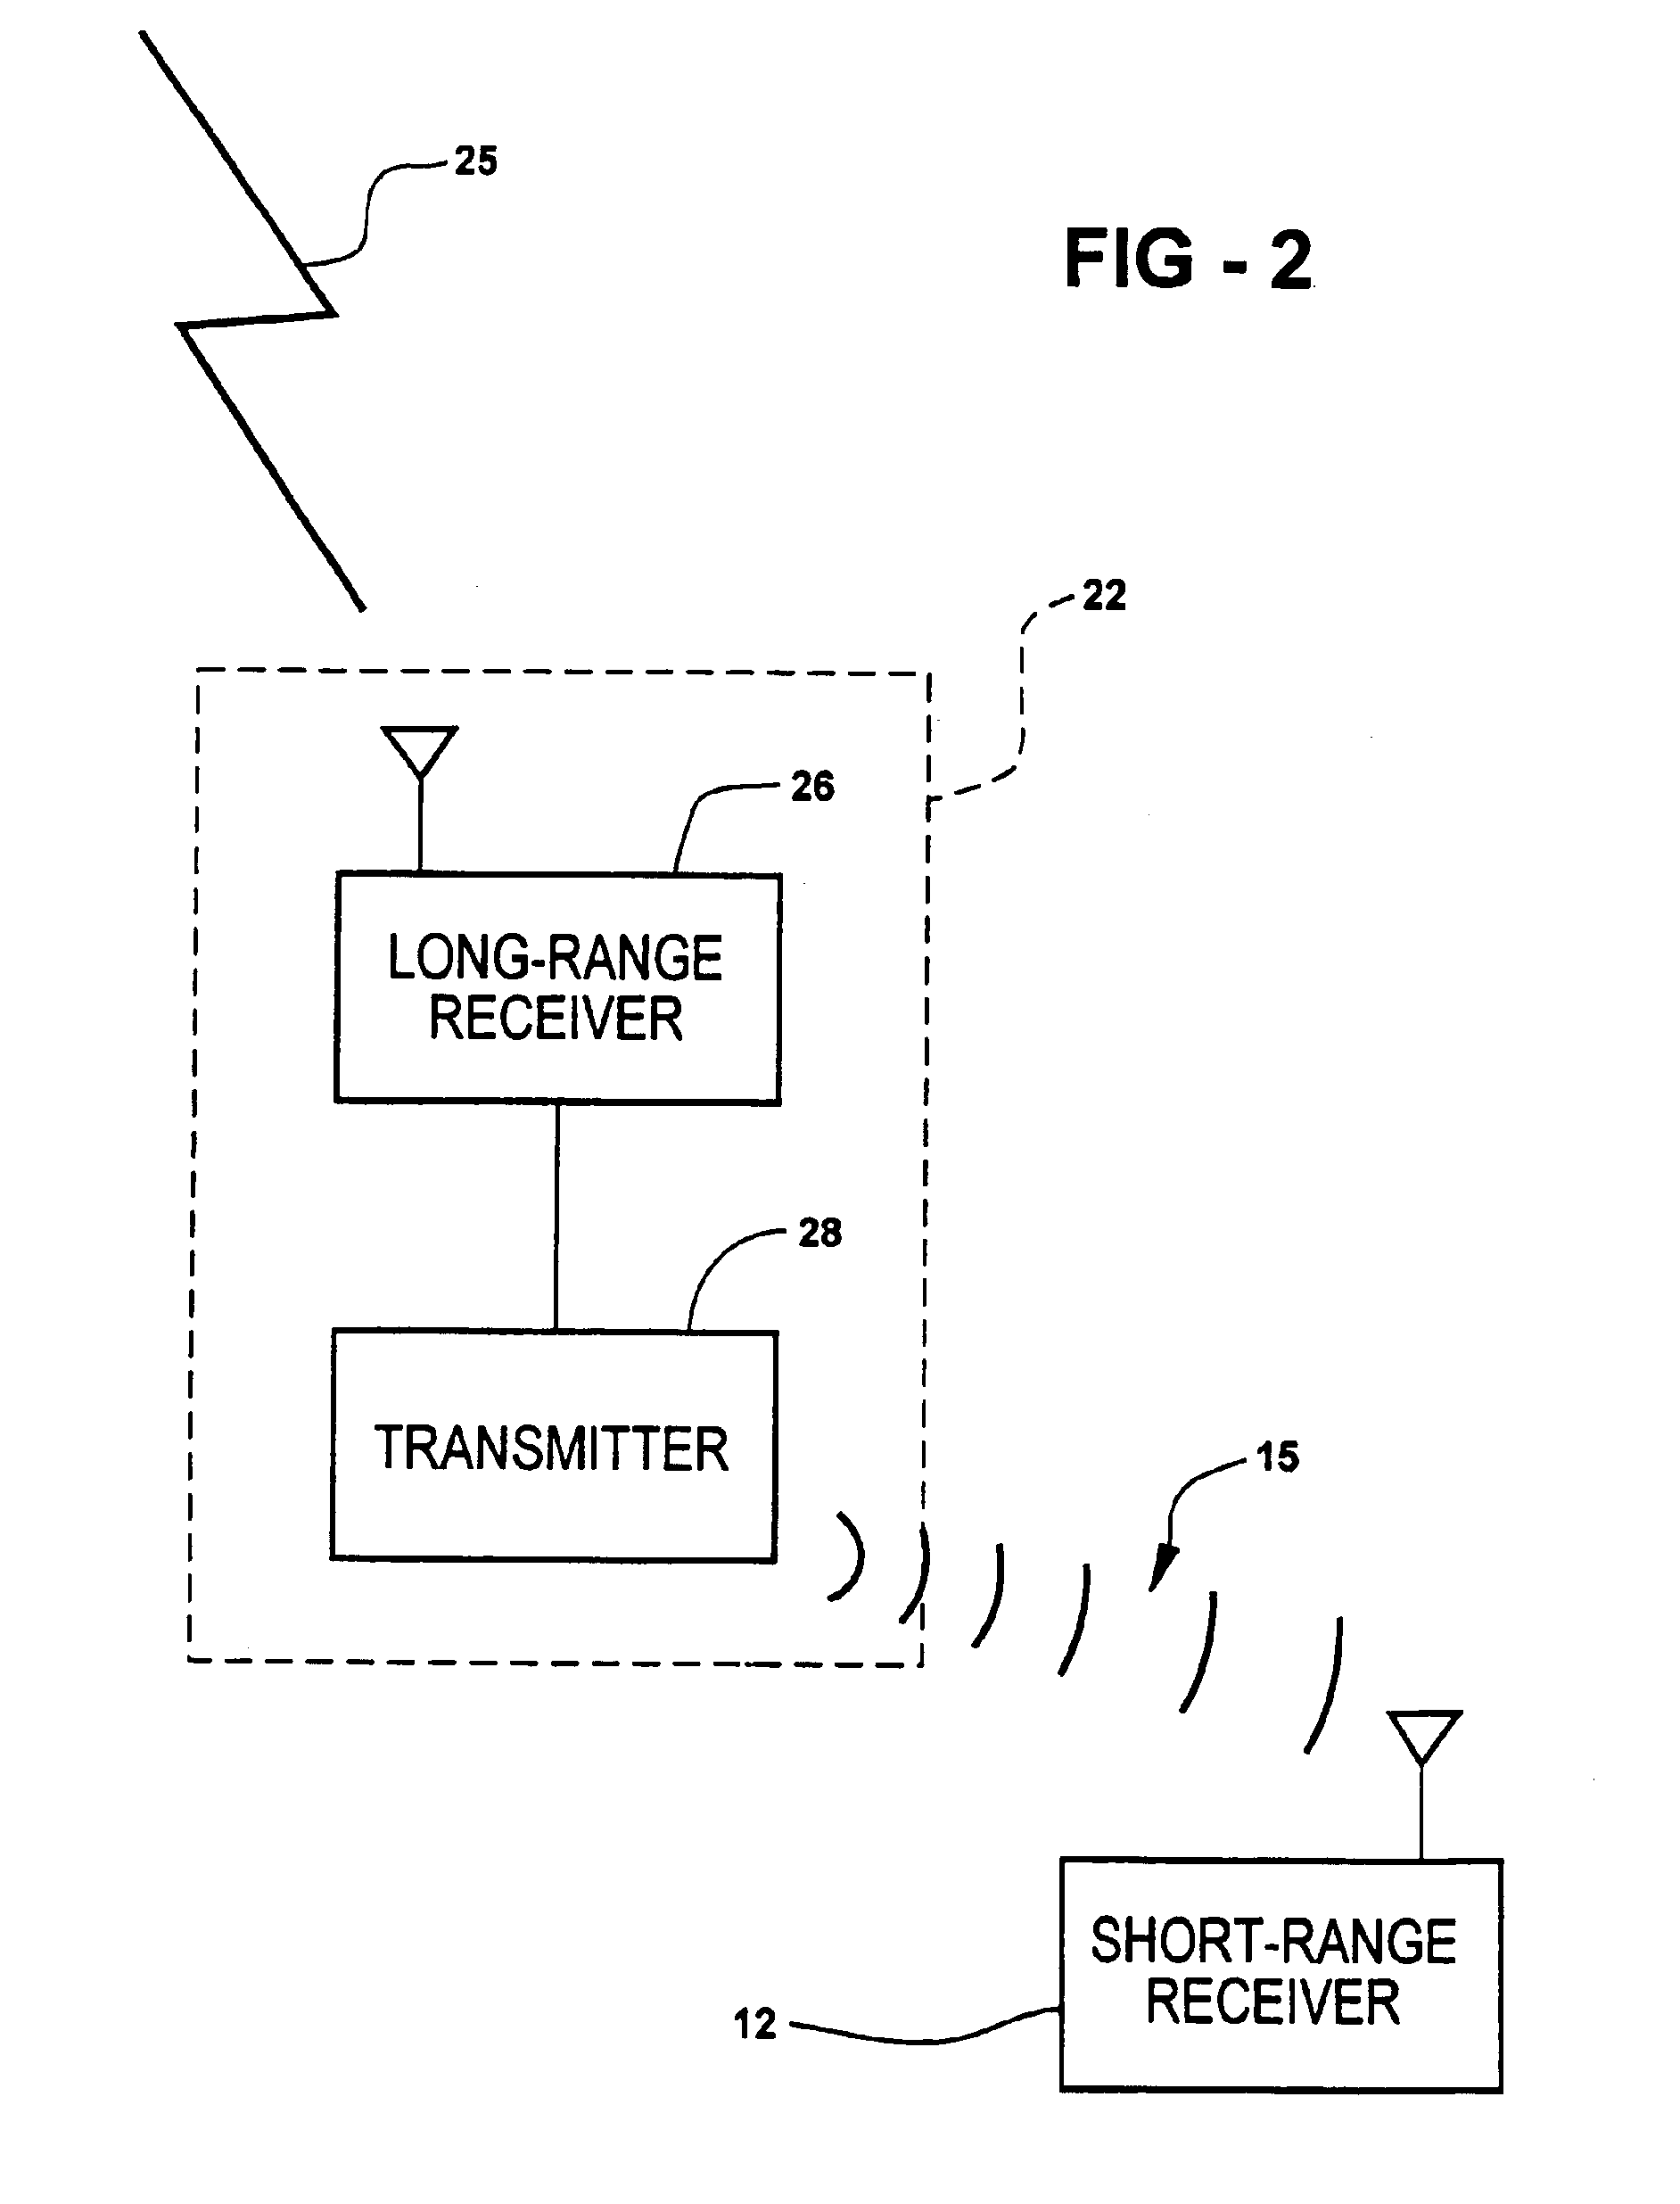 Remote control system for operating selected functions of a vehicle